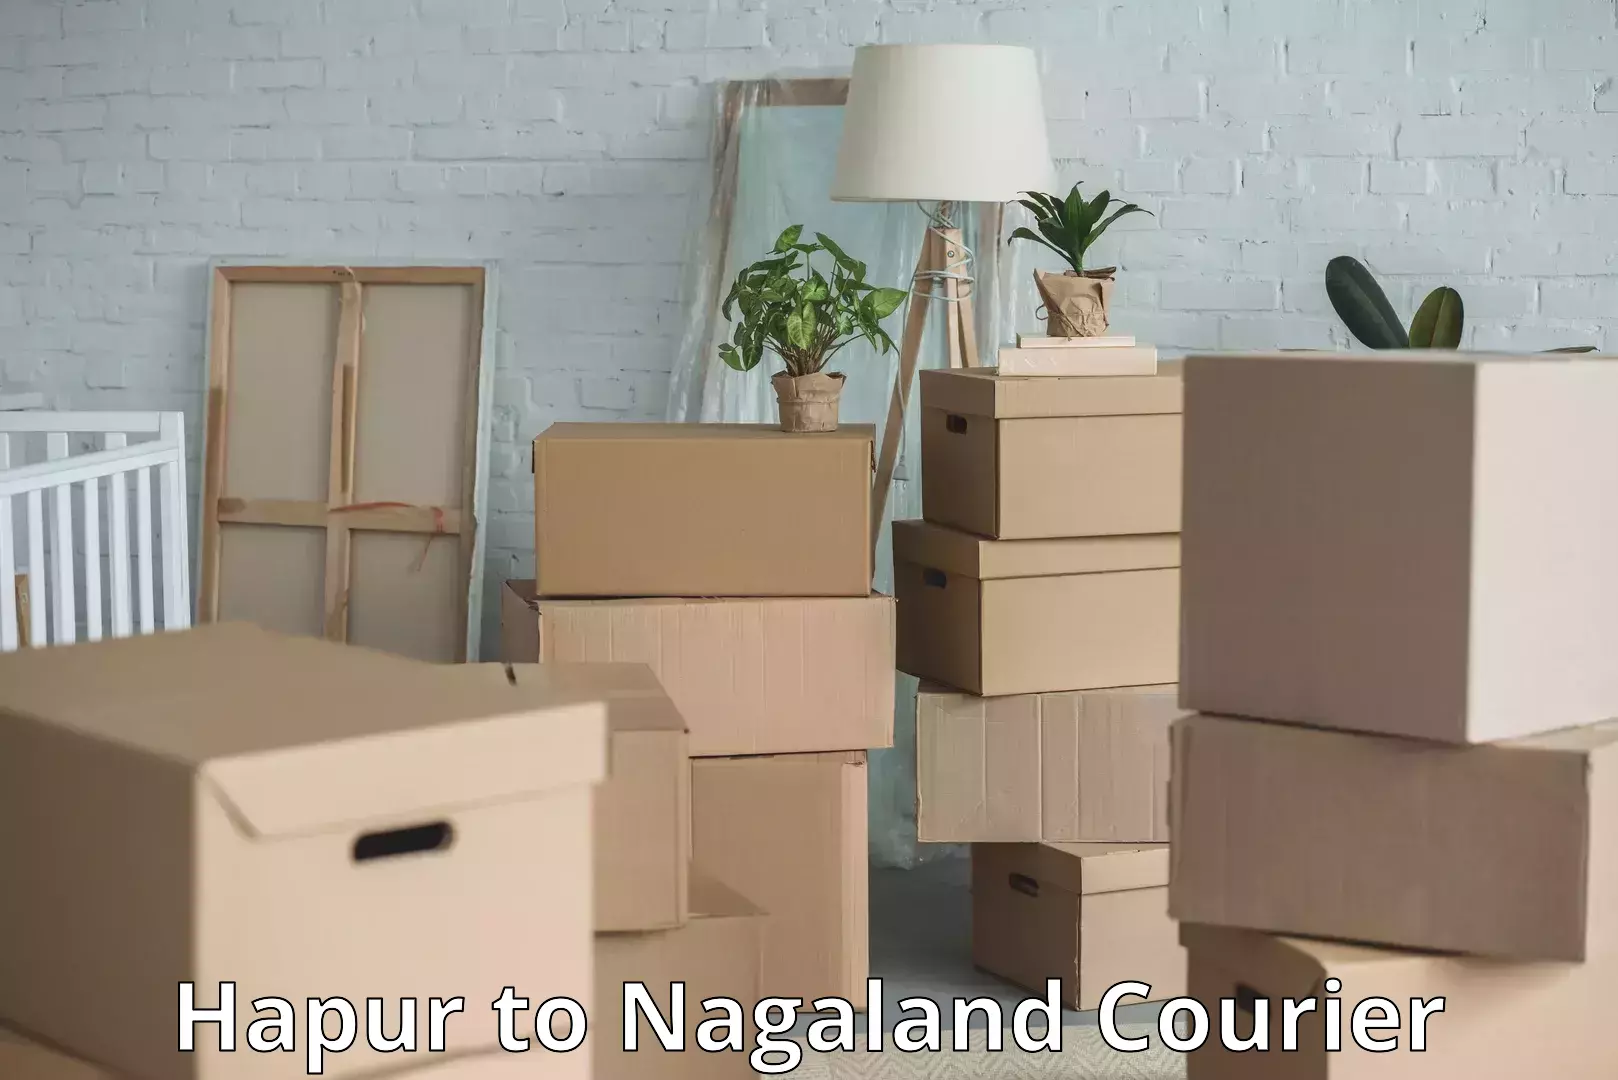 Instant baggage transport quote Hapur to Nagaland